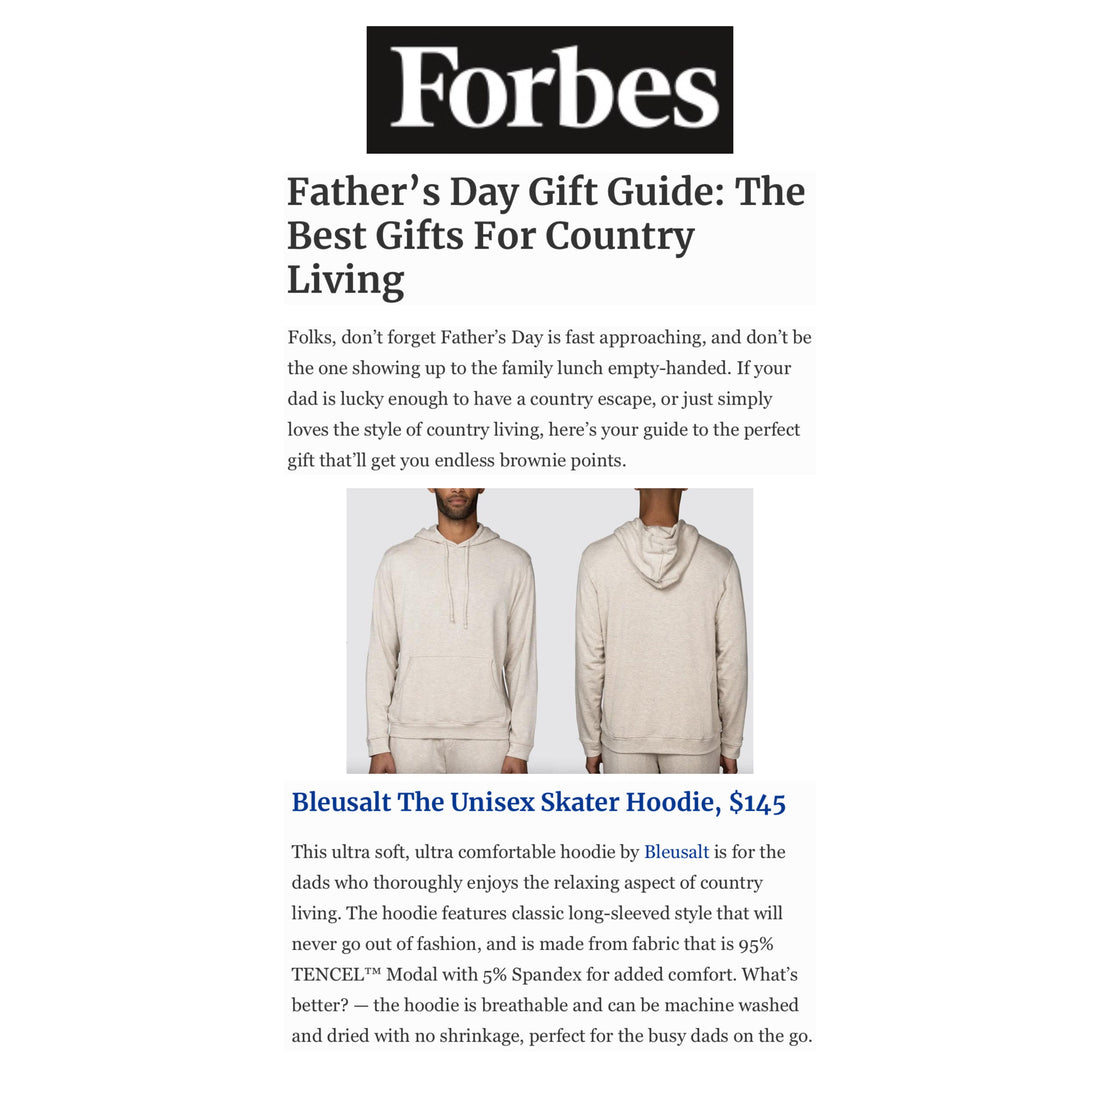 Father's Day Gift Guide: The Best Gifts for Country Living-Bleusalt